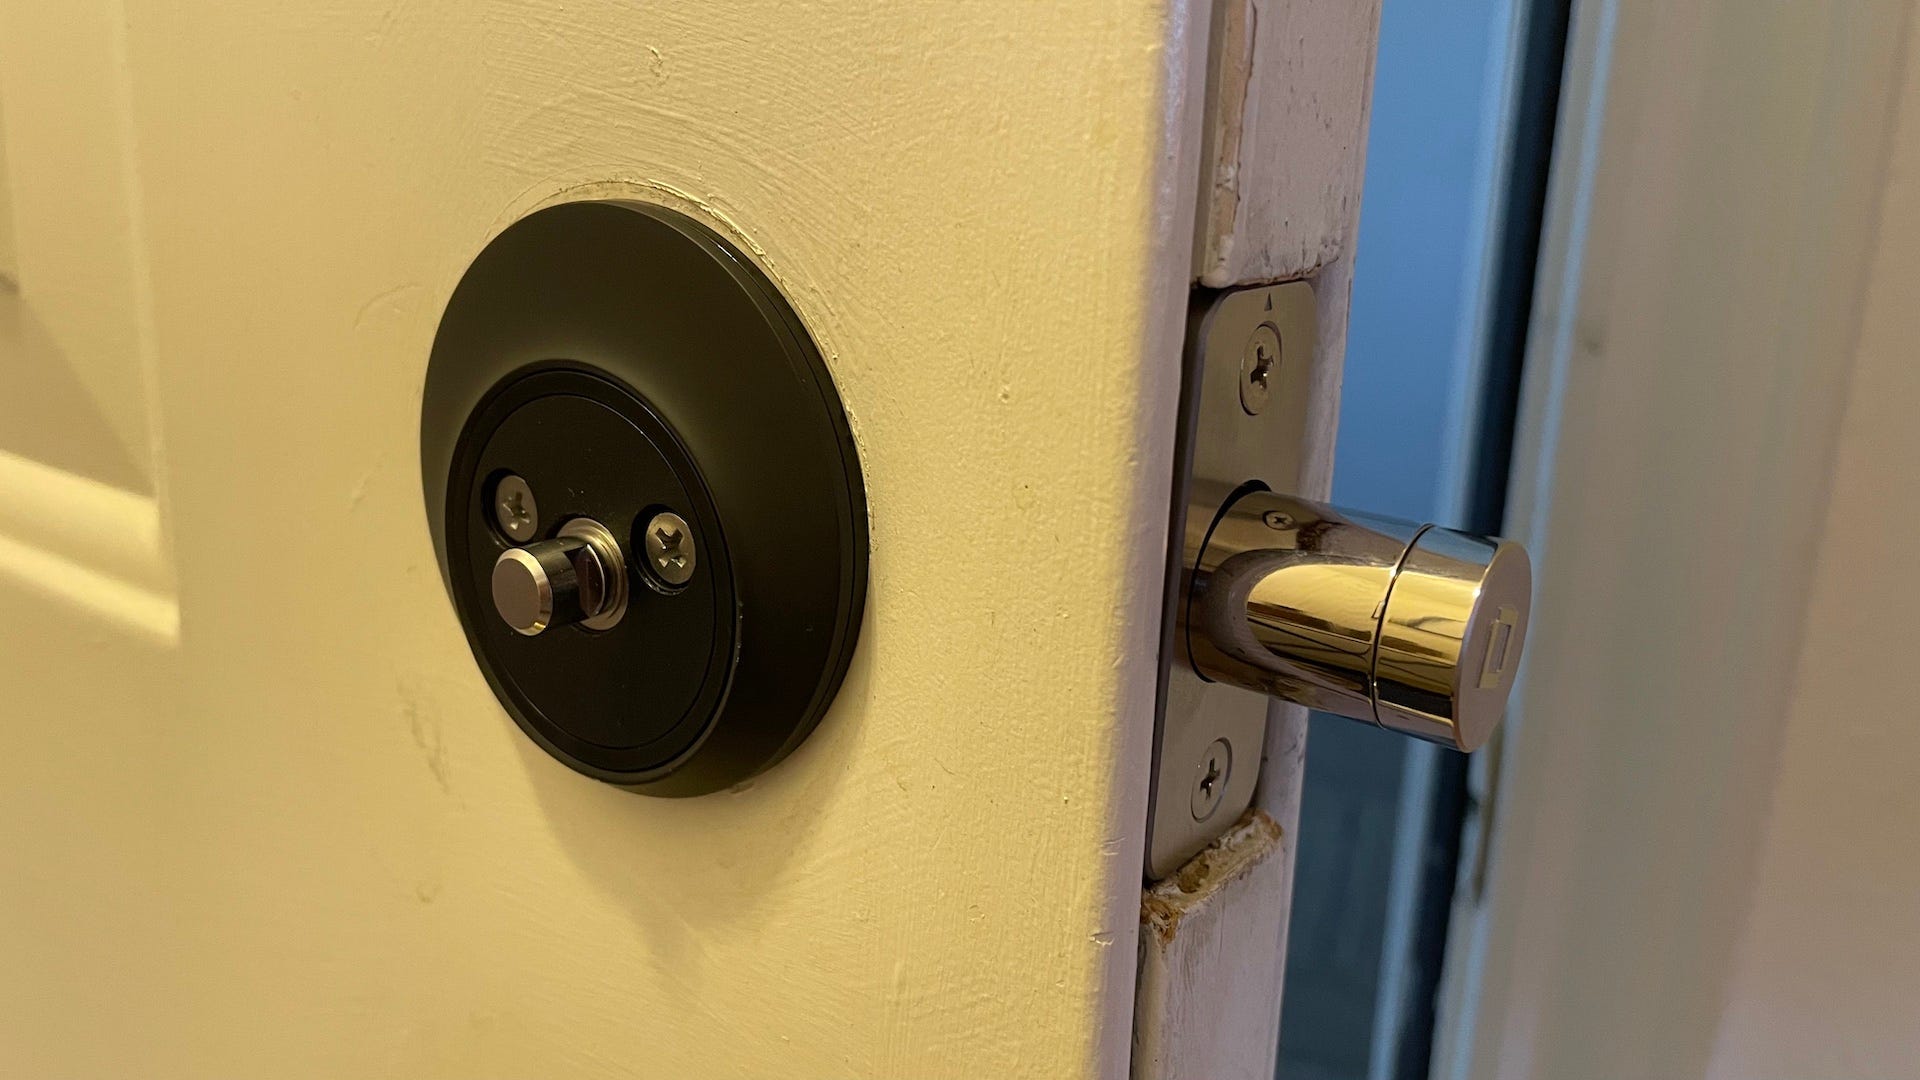 The deadbolt and interior portion of the Level Lock+ during install.